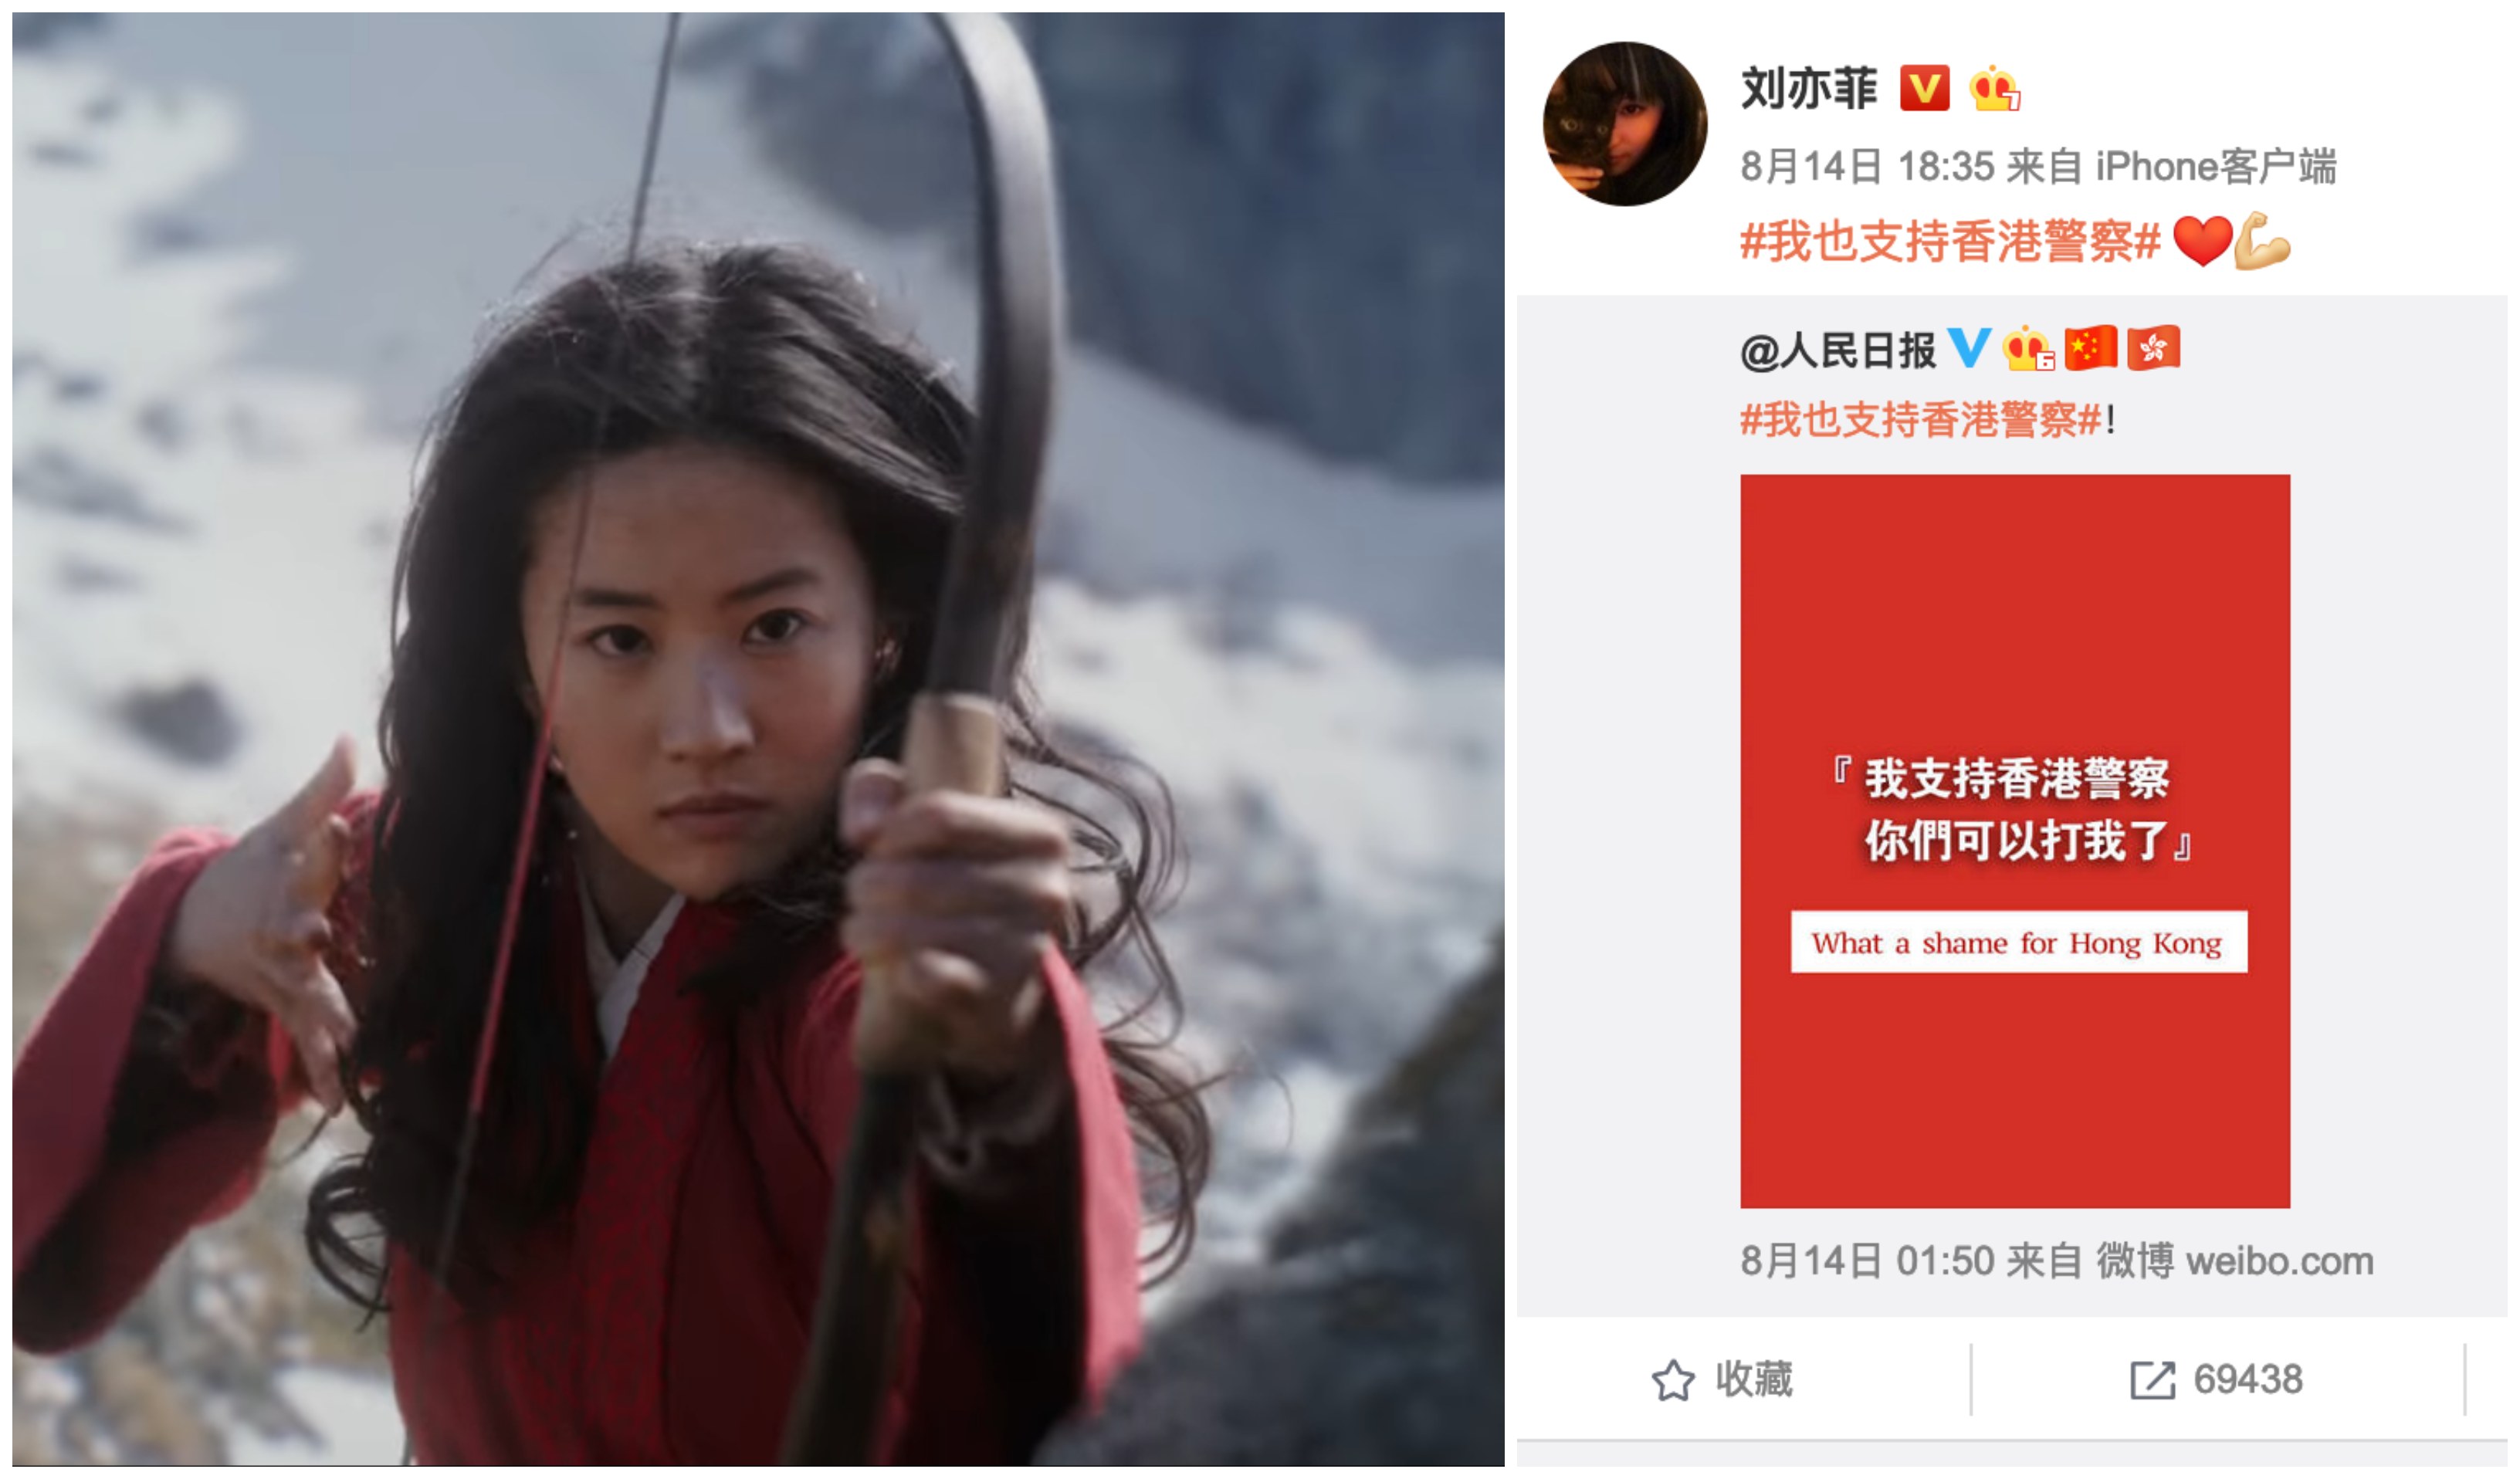 Actress Crystal Liu Yifei as Mulan in the live action remake of the eponymous Disney classic (left), and a post she made on Weibo rebuking Hong Kong’s protest movement (right). Screengrabs via YouTube/Weibo.